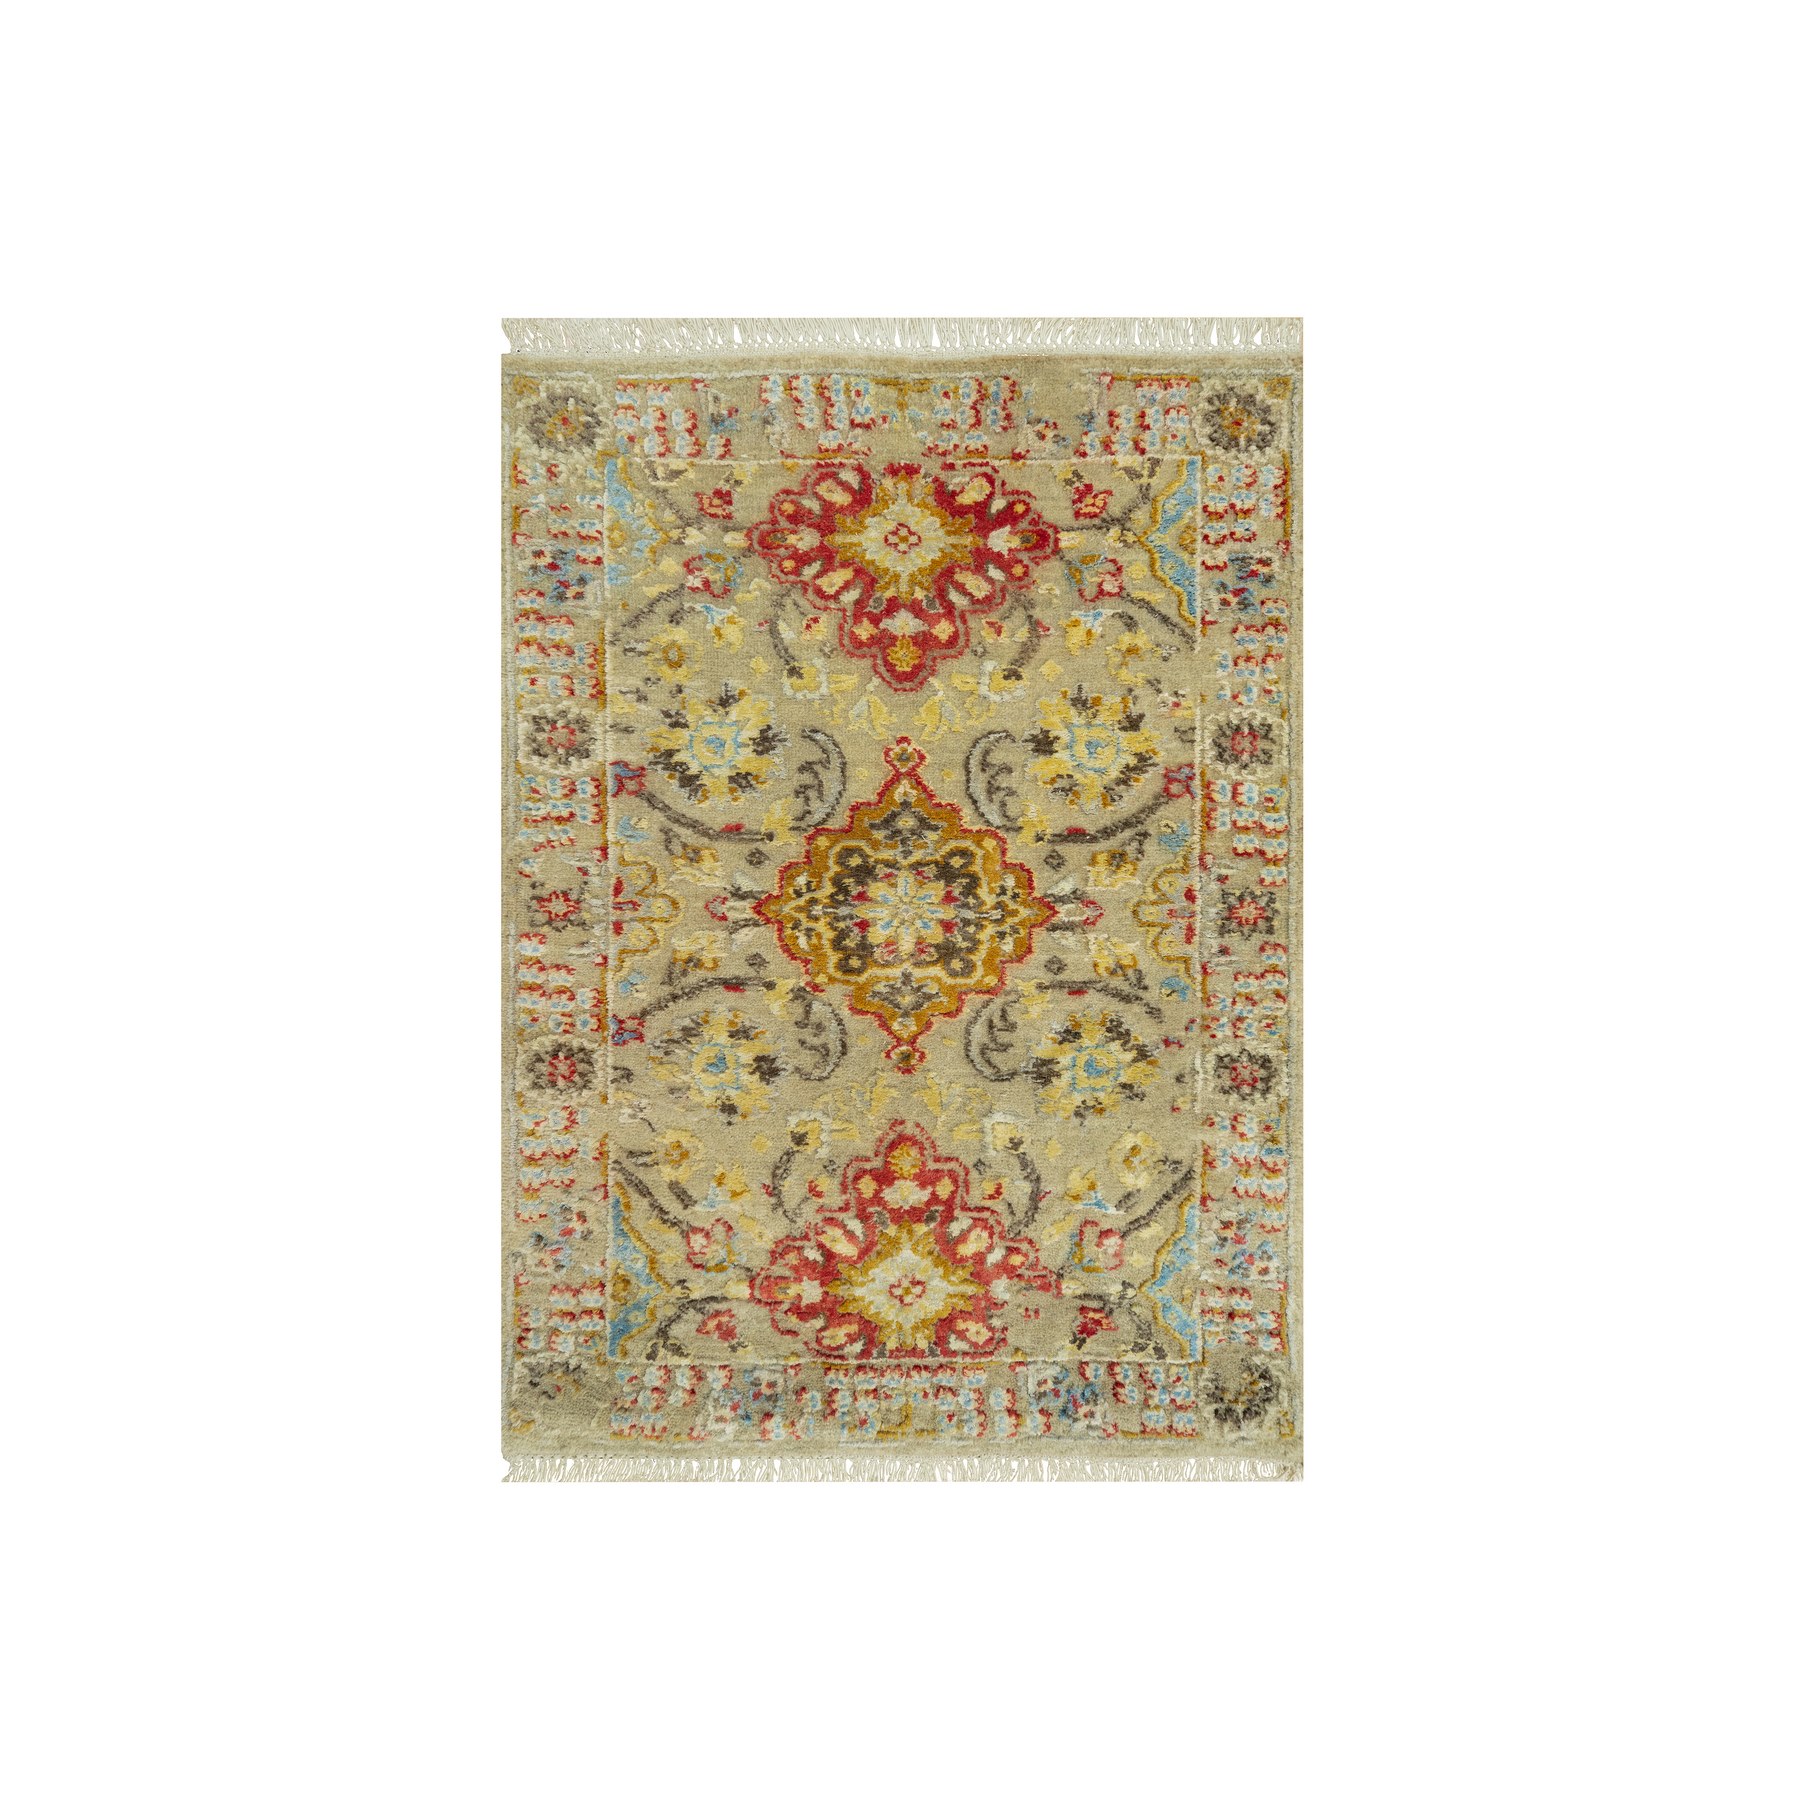  Silk Hand-Knotted Area Rug 2'3